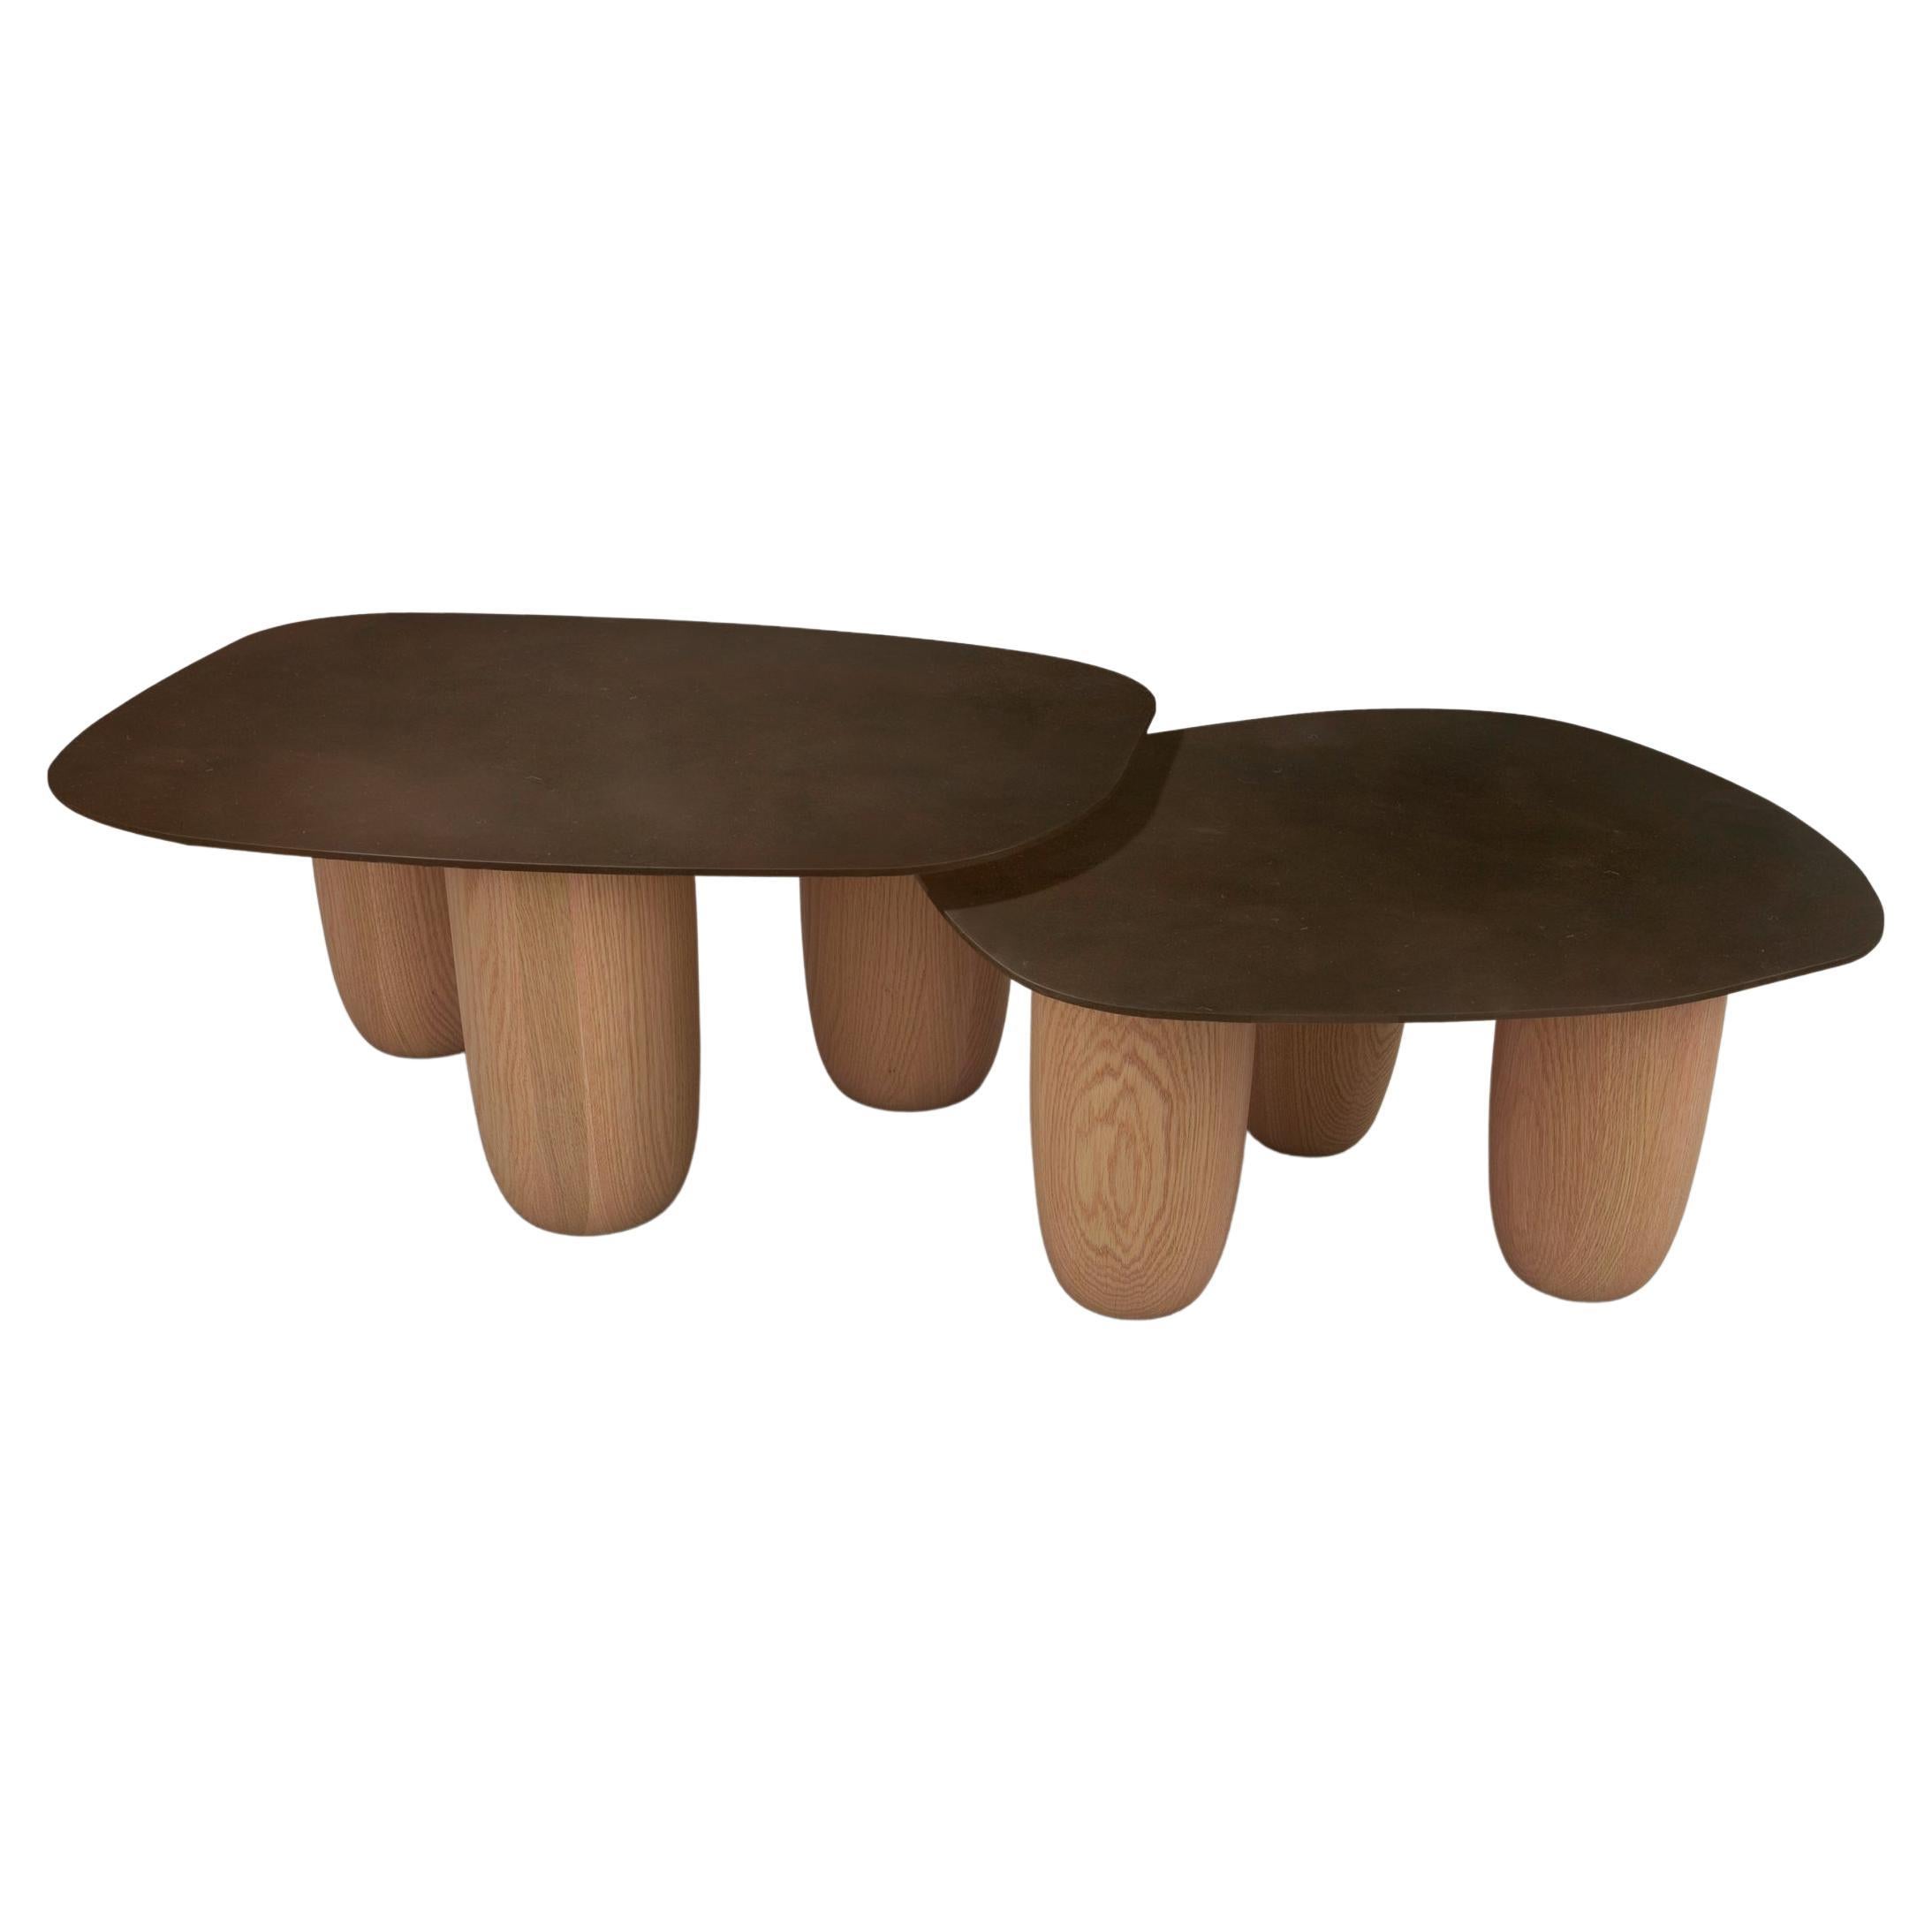 Minimalist Low Tables Japanese Brown Patina Steel with Oak Legs Vivian Carbonell For Sale